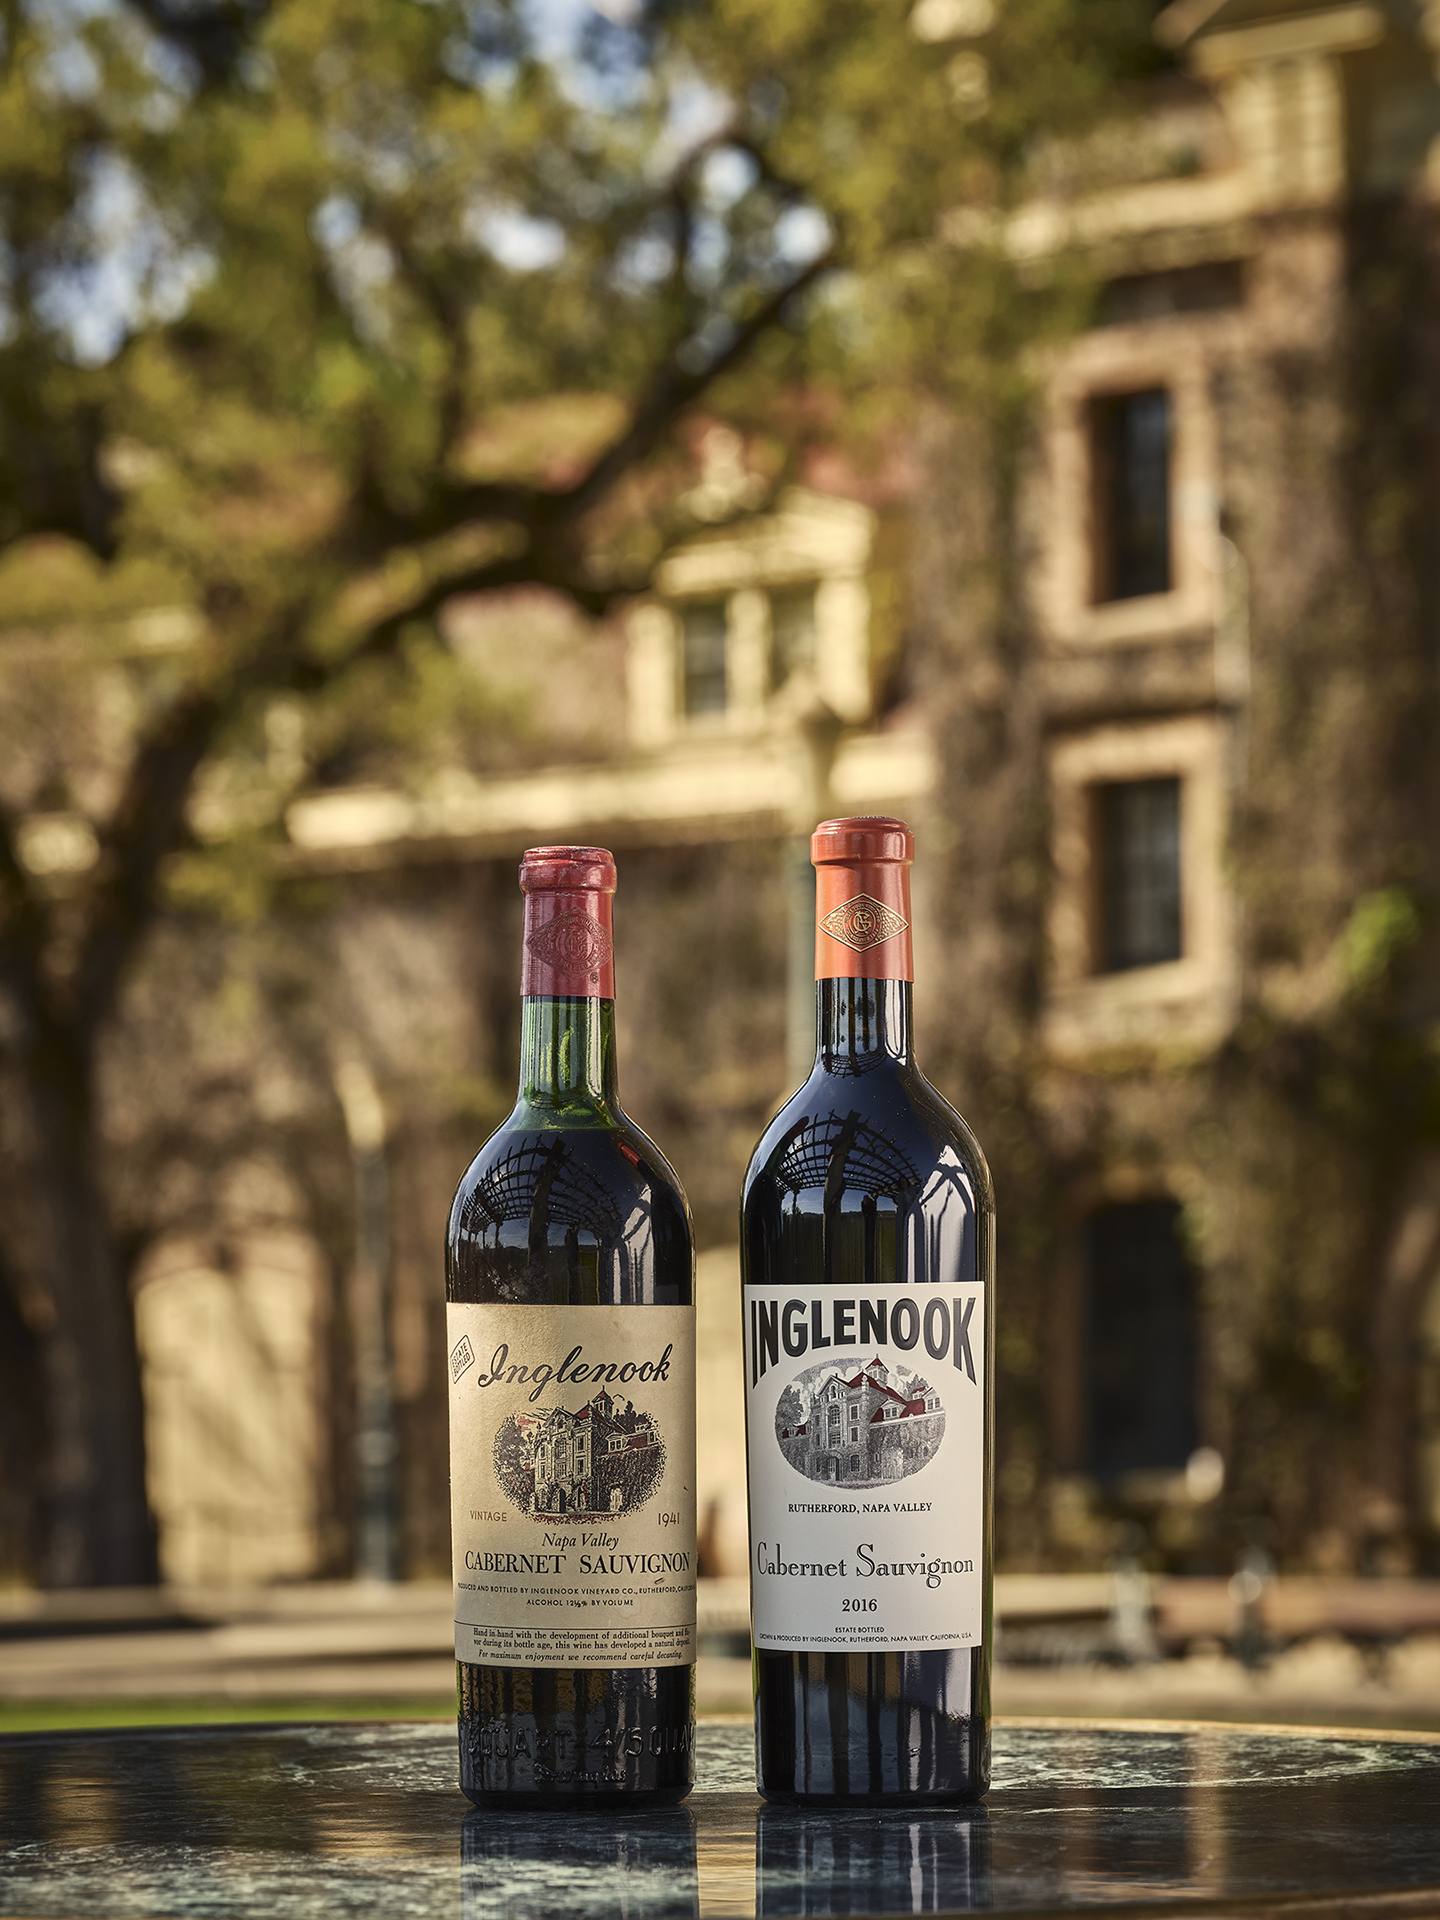 Bottles of cabernet sauvignon in front of estate winery.